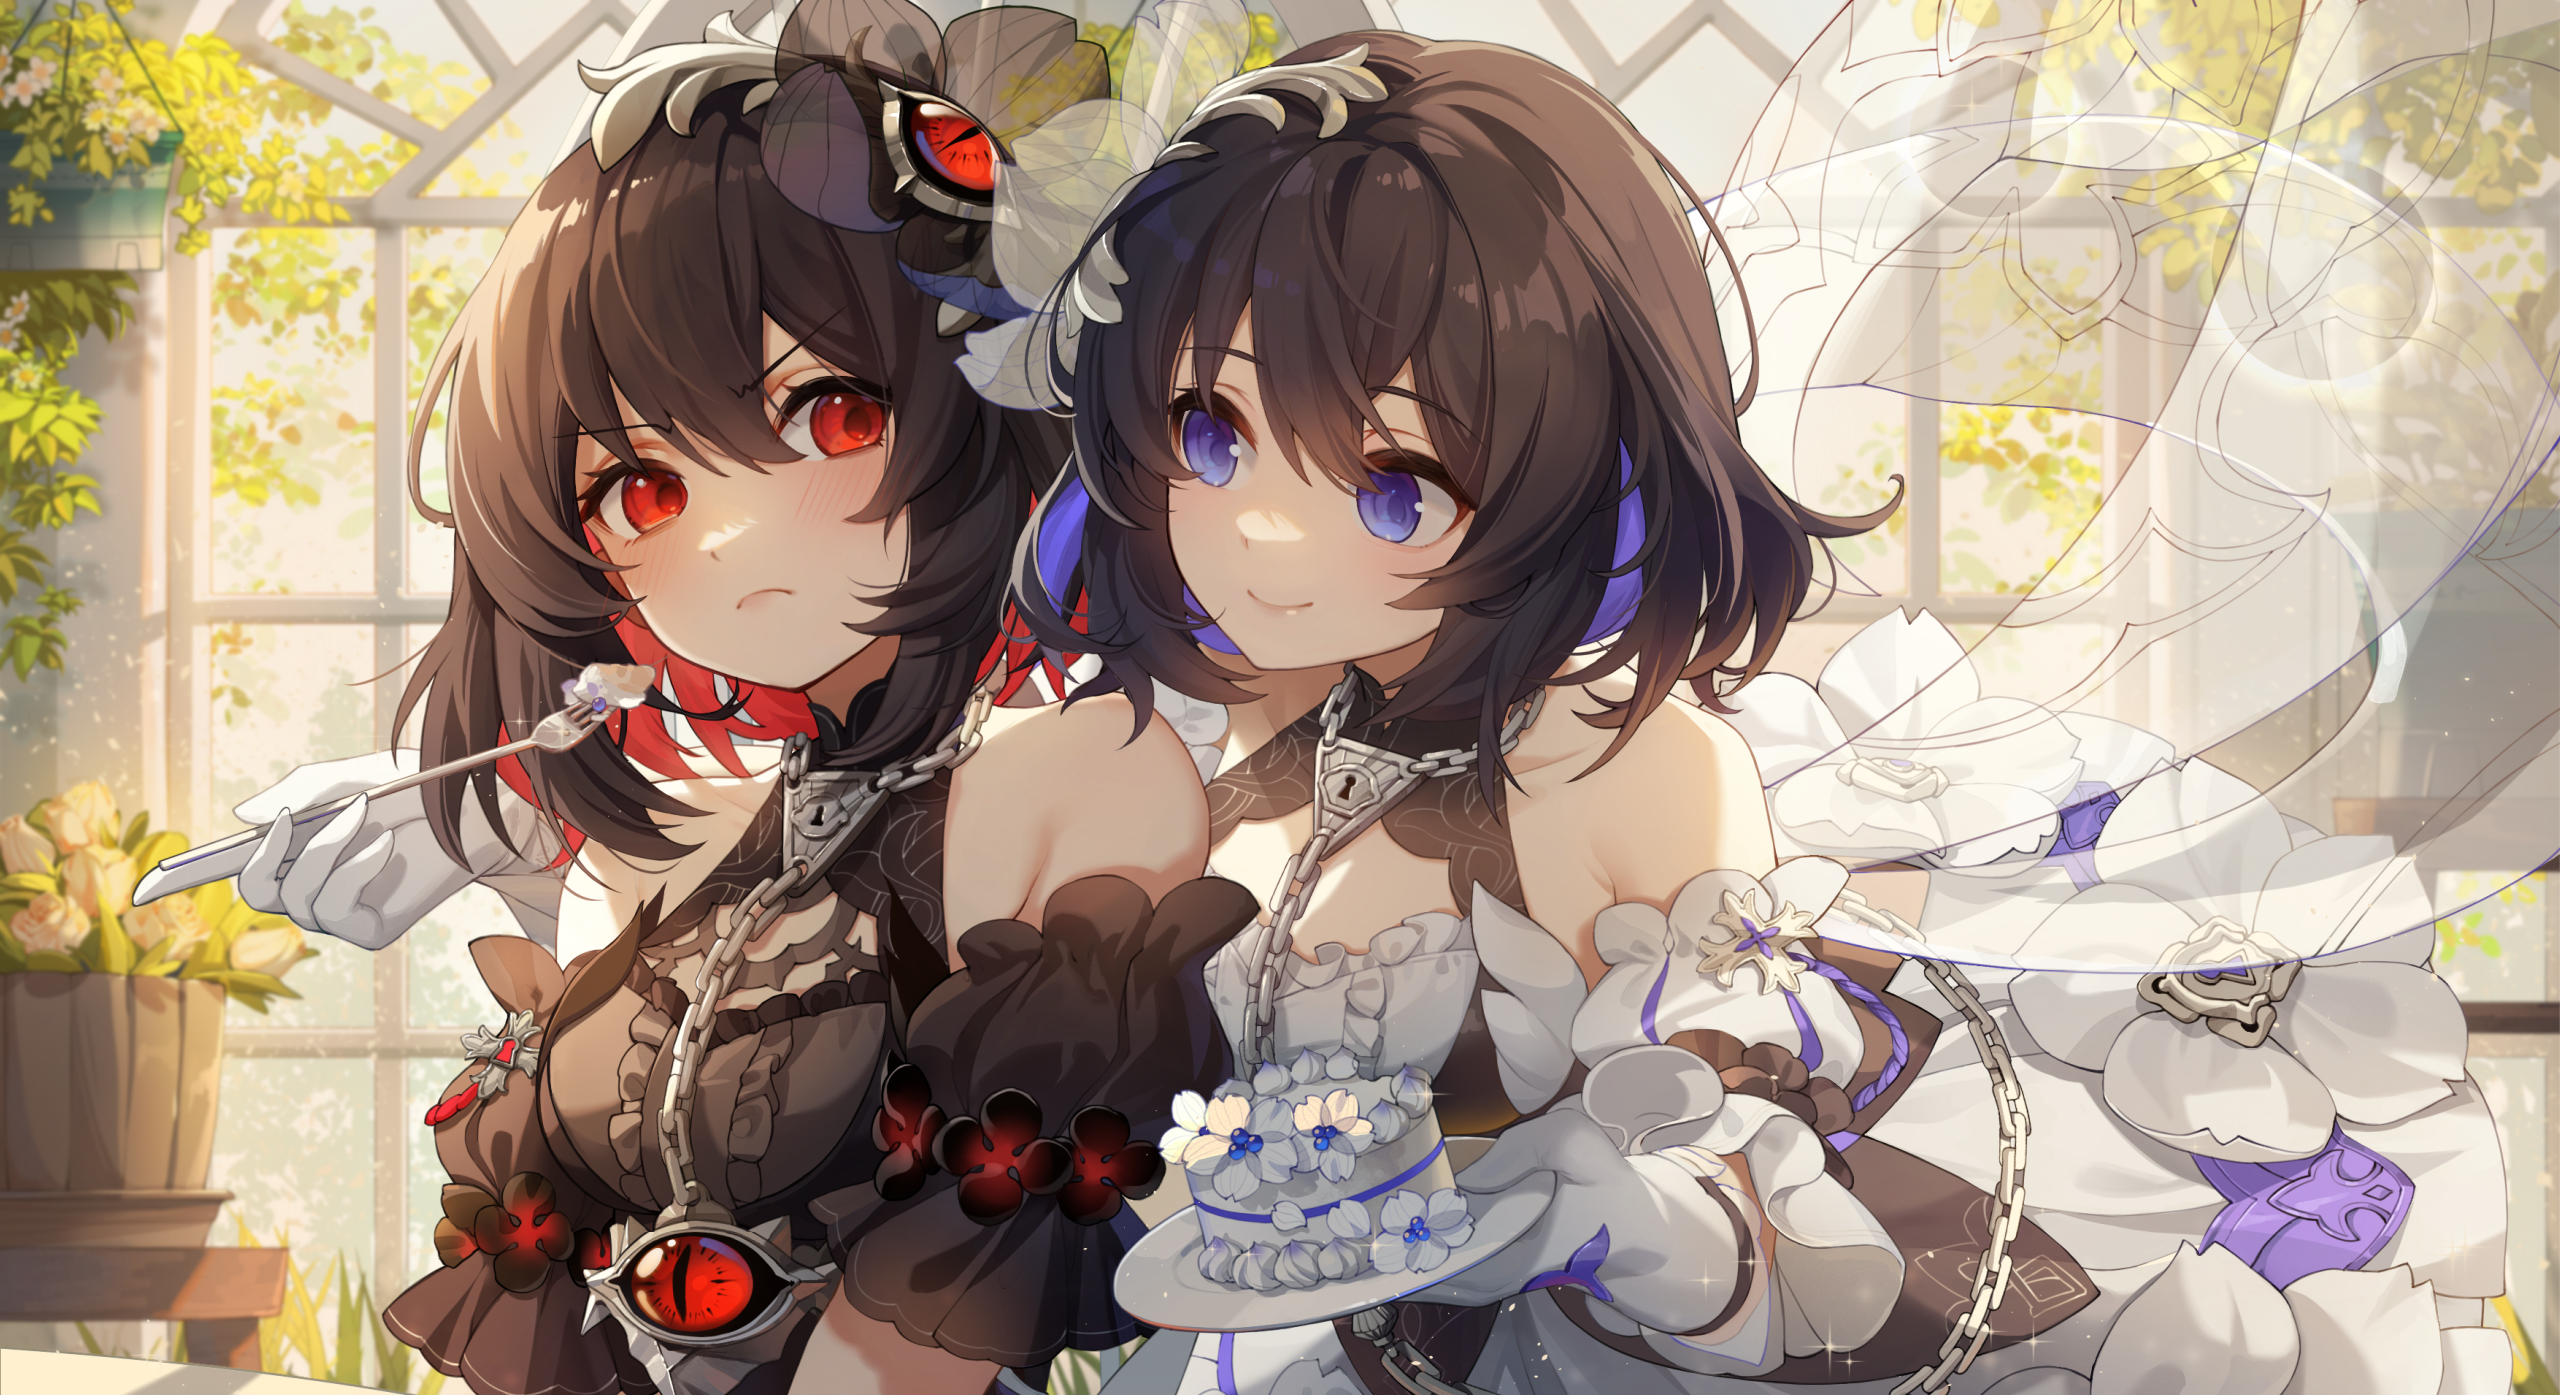 Anime 2560x1395 anime anime girls Honkai Impact 3rd Honkai Impact Seele Vollerei Seele maid maid outfit gloves fork frown smiling blushing flowers cake sweets short hair